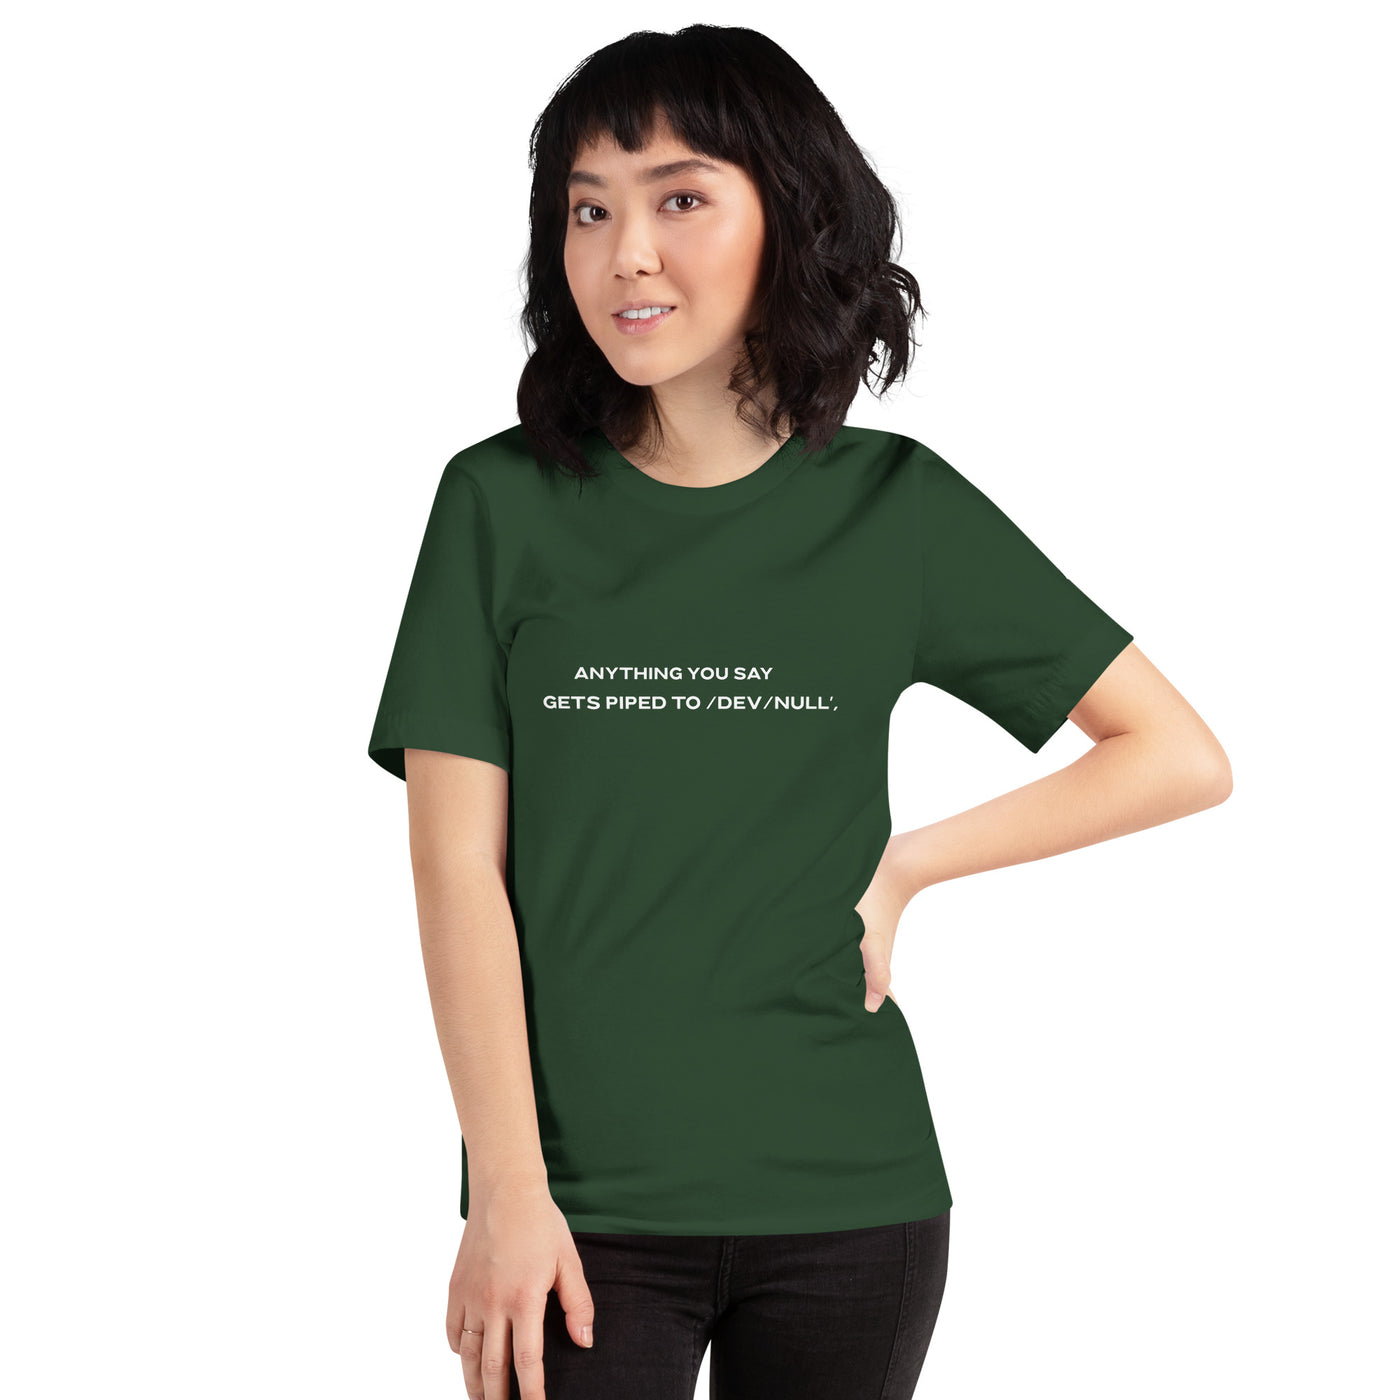 Anything you say Gets piped to devnull V2 - Unisex t-shirt